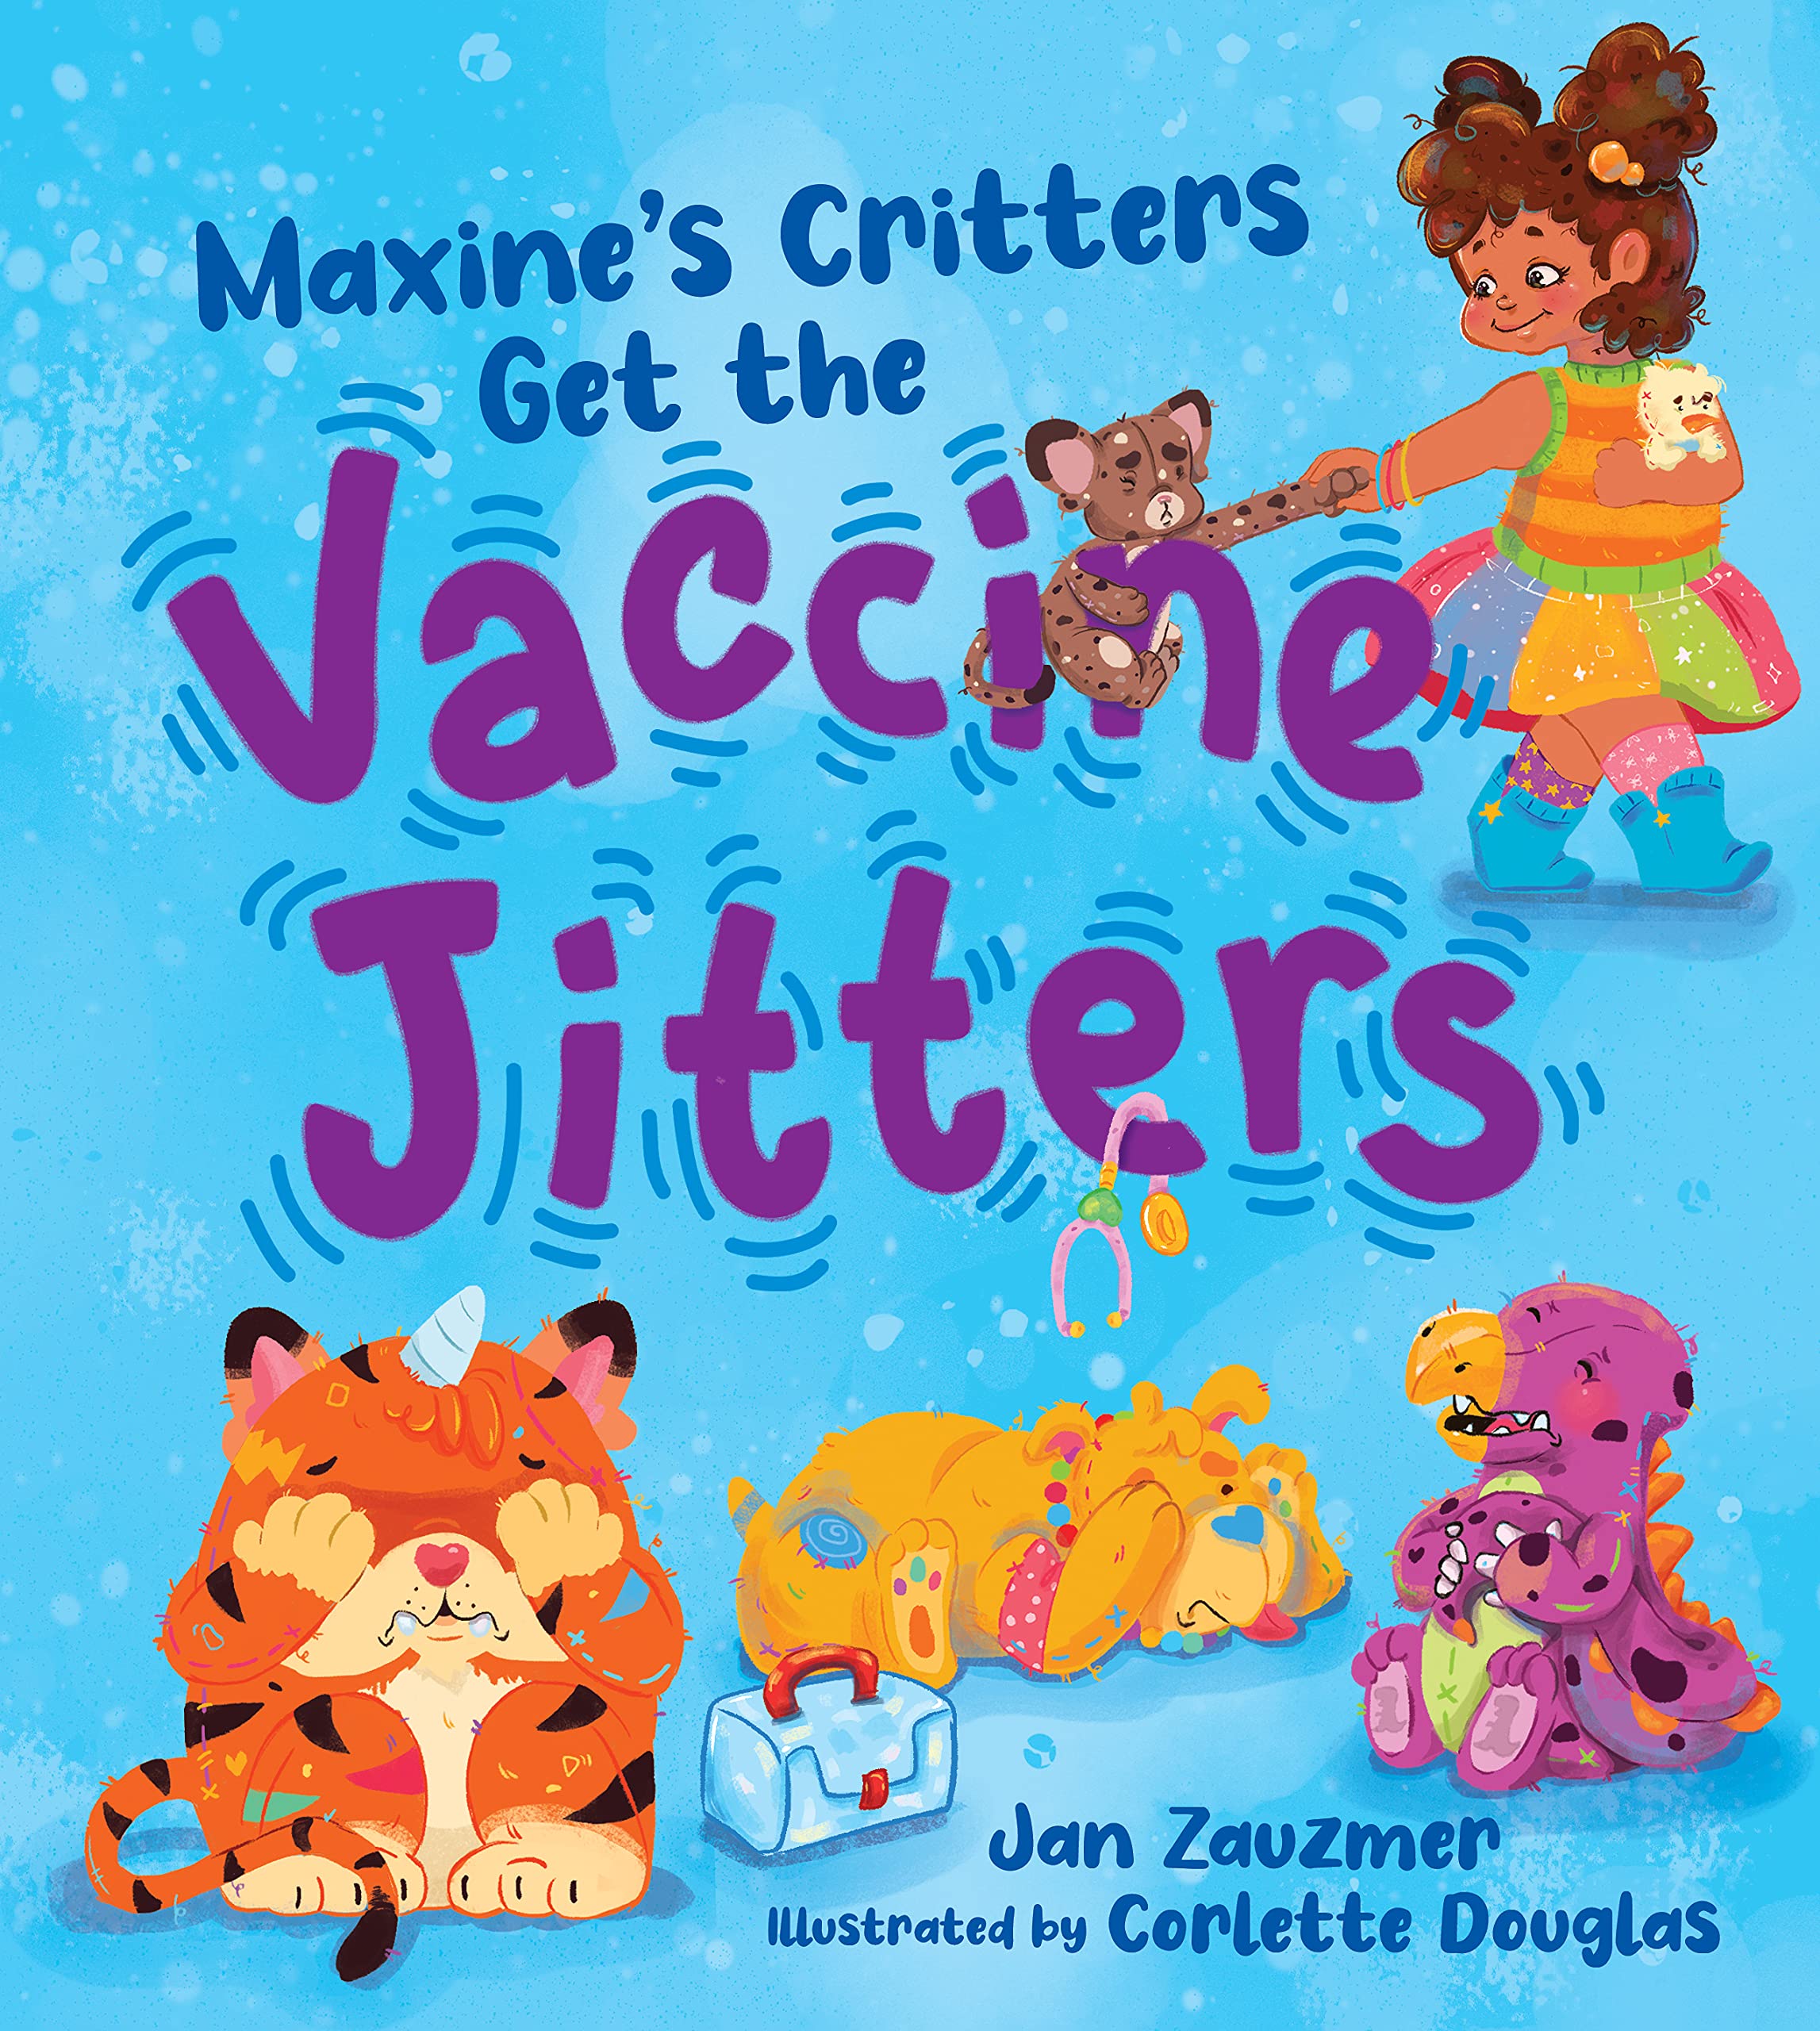 Maxine&#039;s Critters Get the Vaccine Jitters